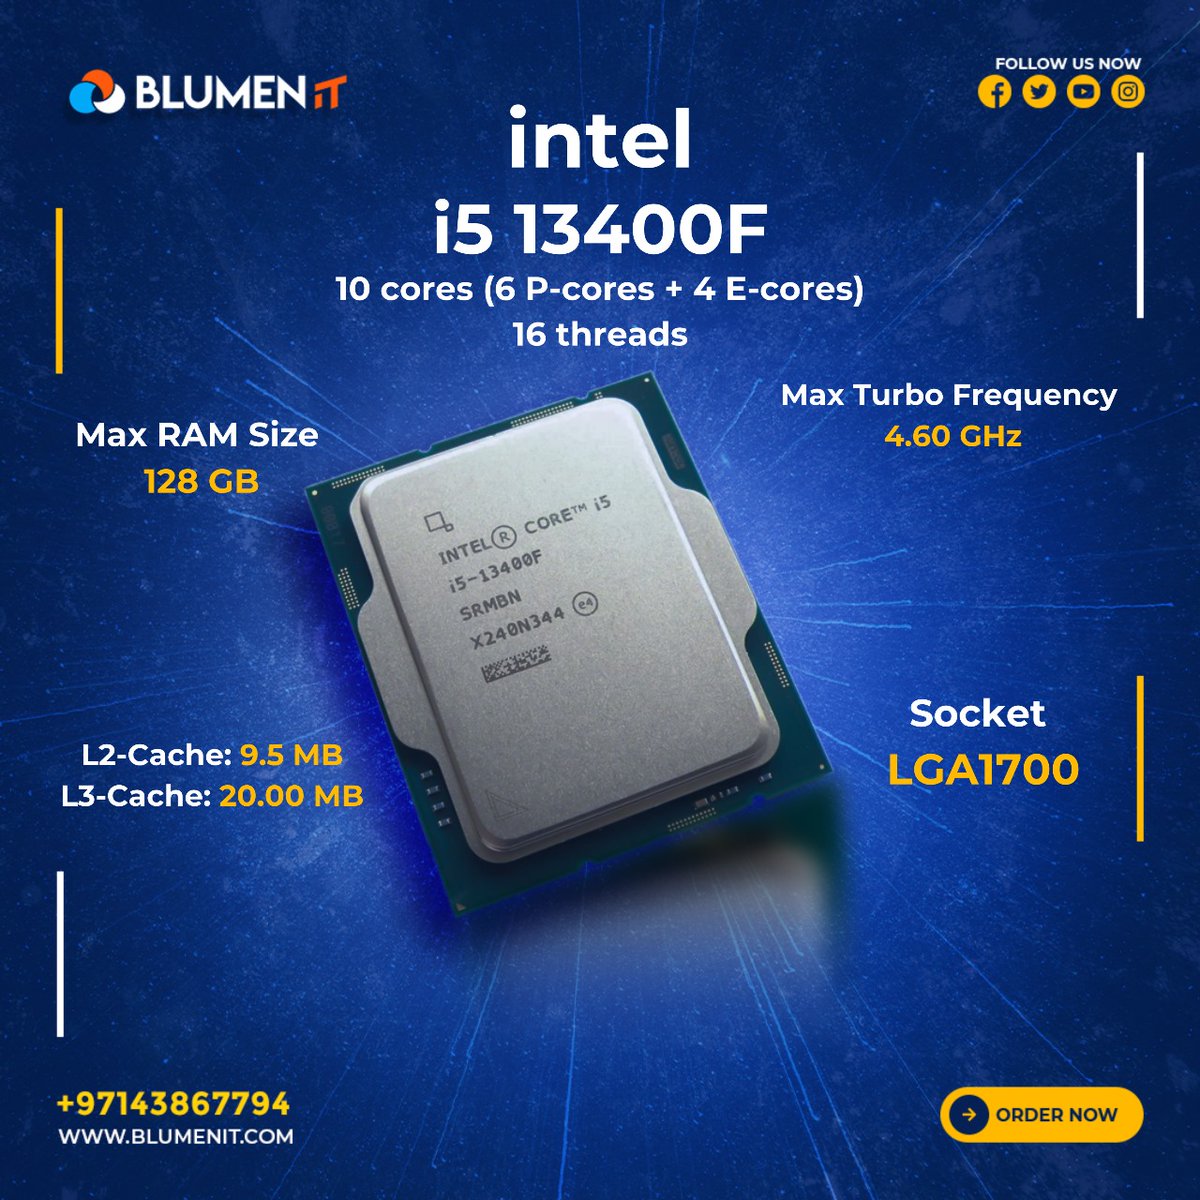 #computeraccessories #gamingprocessor #motherboard #processor #gamingmonitor #asusmonitor #asus #computer #uaegamers #Intel #dubaigamers #computeraccessories #topgamers #speed #gamingchair #chairyoga #cougar